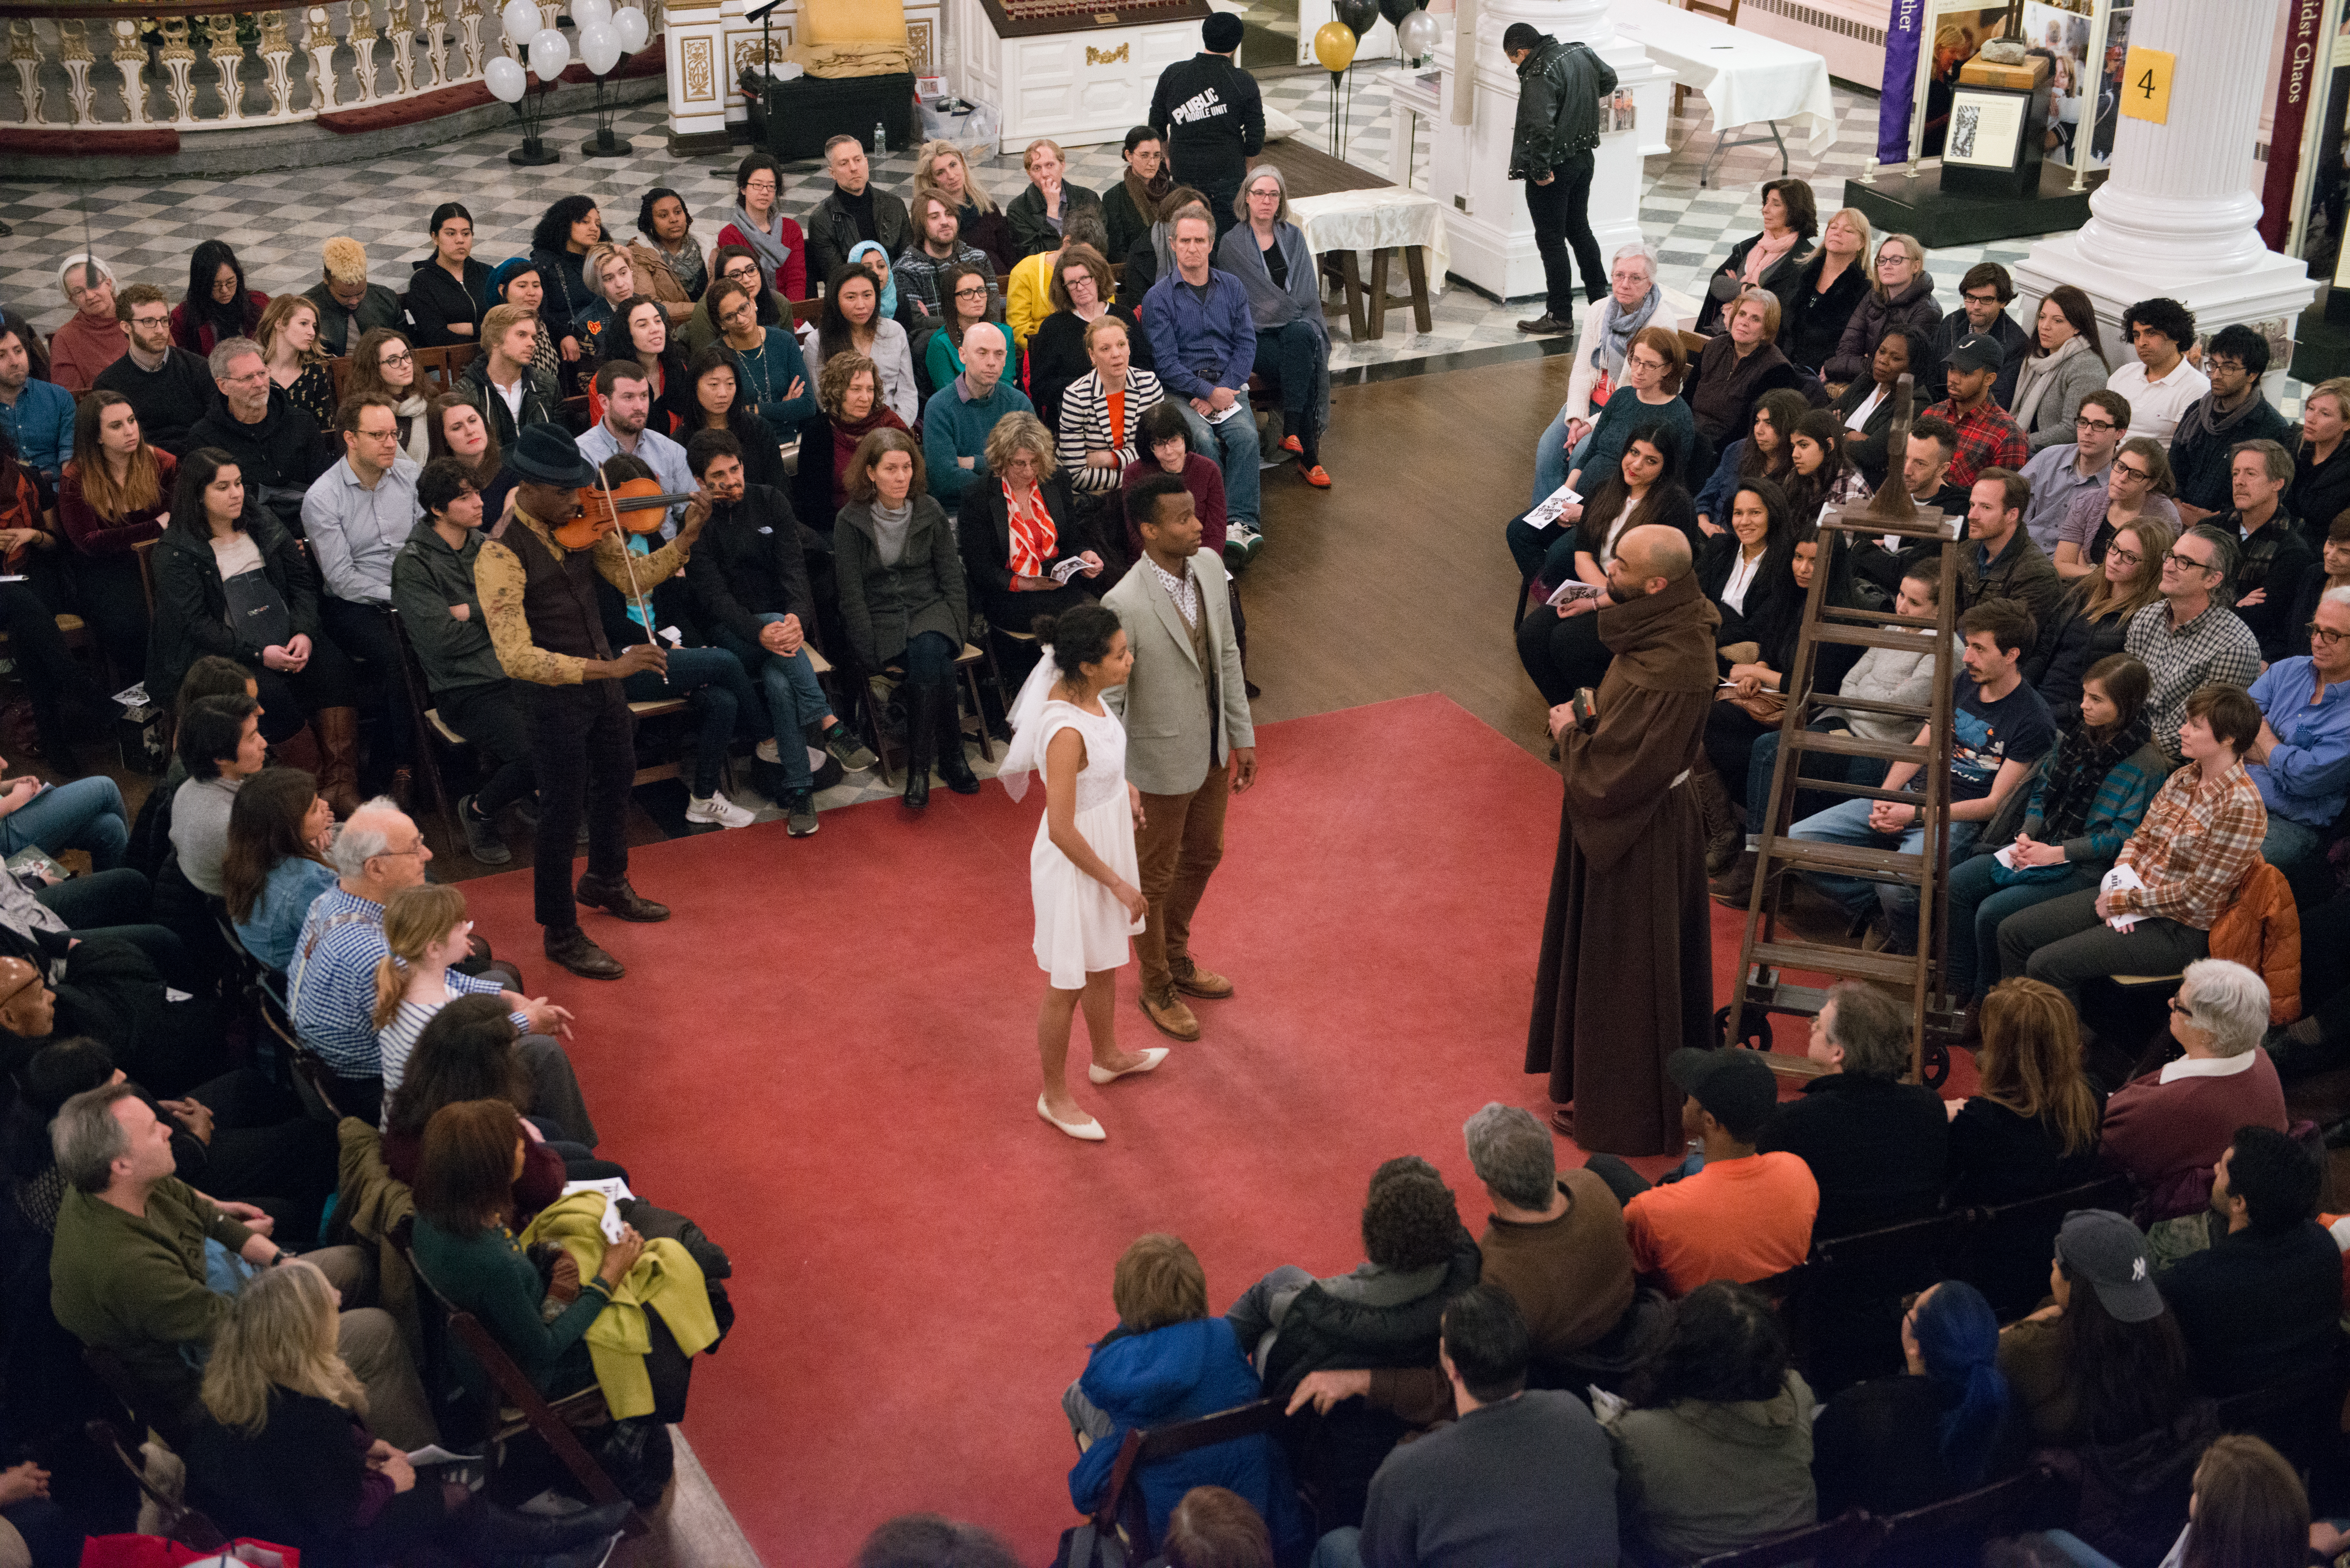 The Public Theater's Mobile Unit production of "Romeo and Juliet" in St. Paul's Cathedral. Photo Credit: Erik Pearson